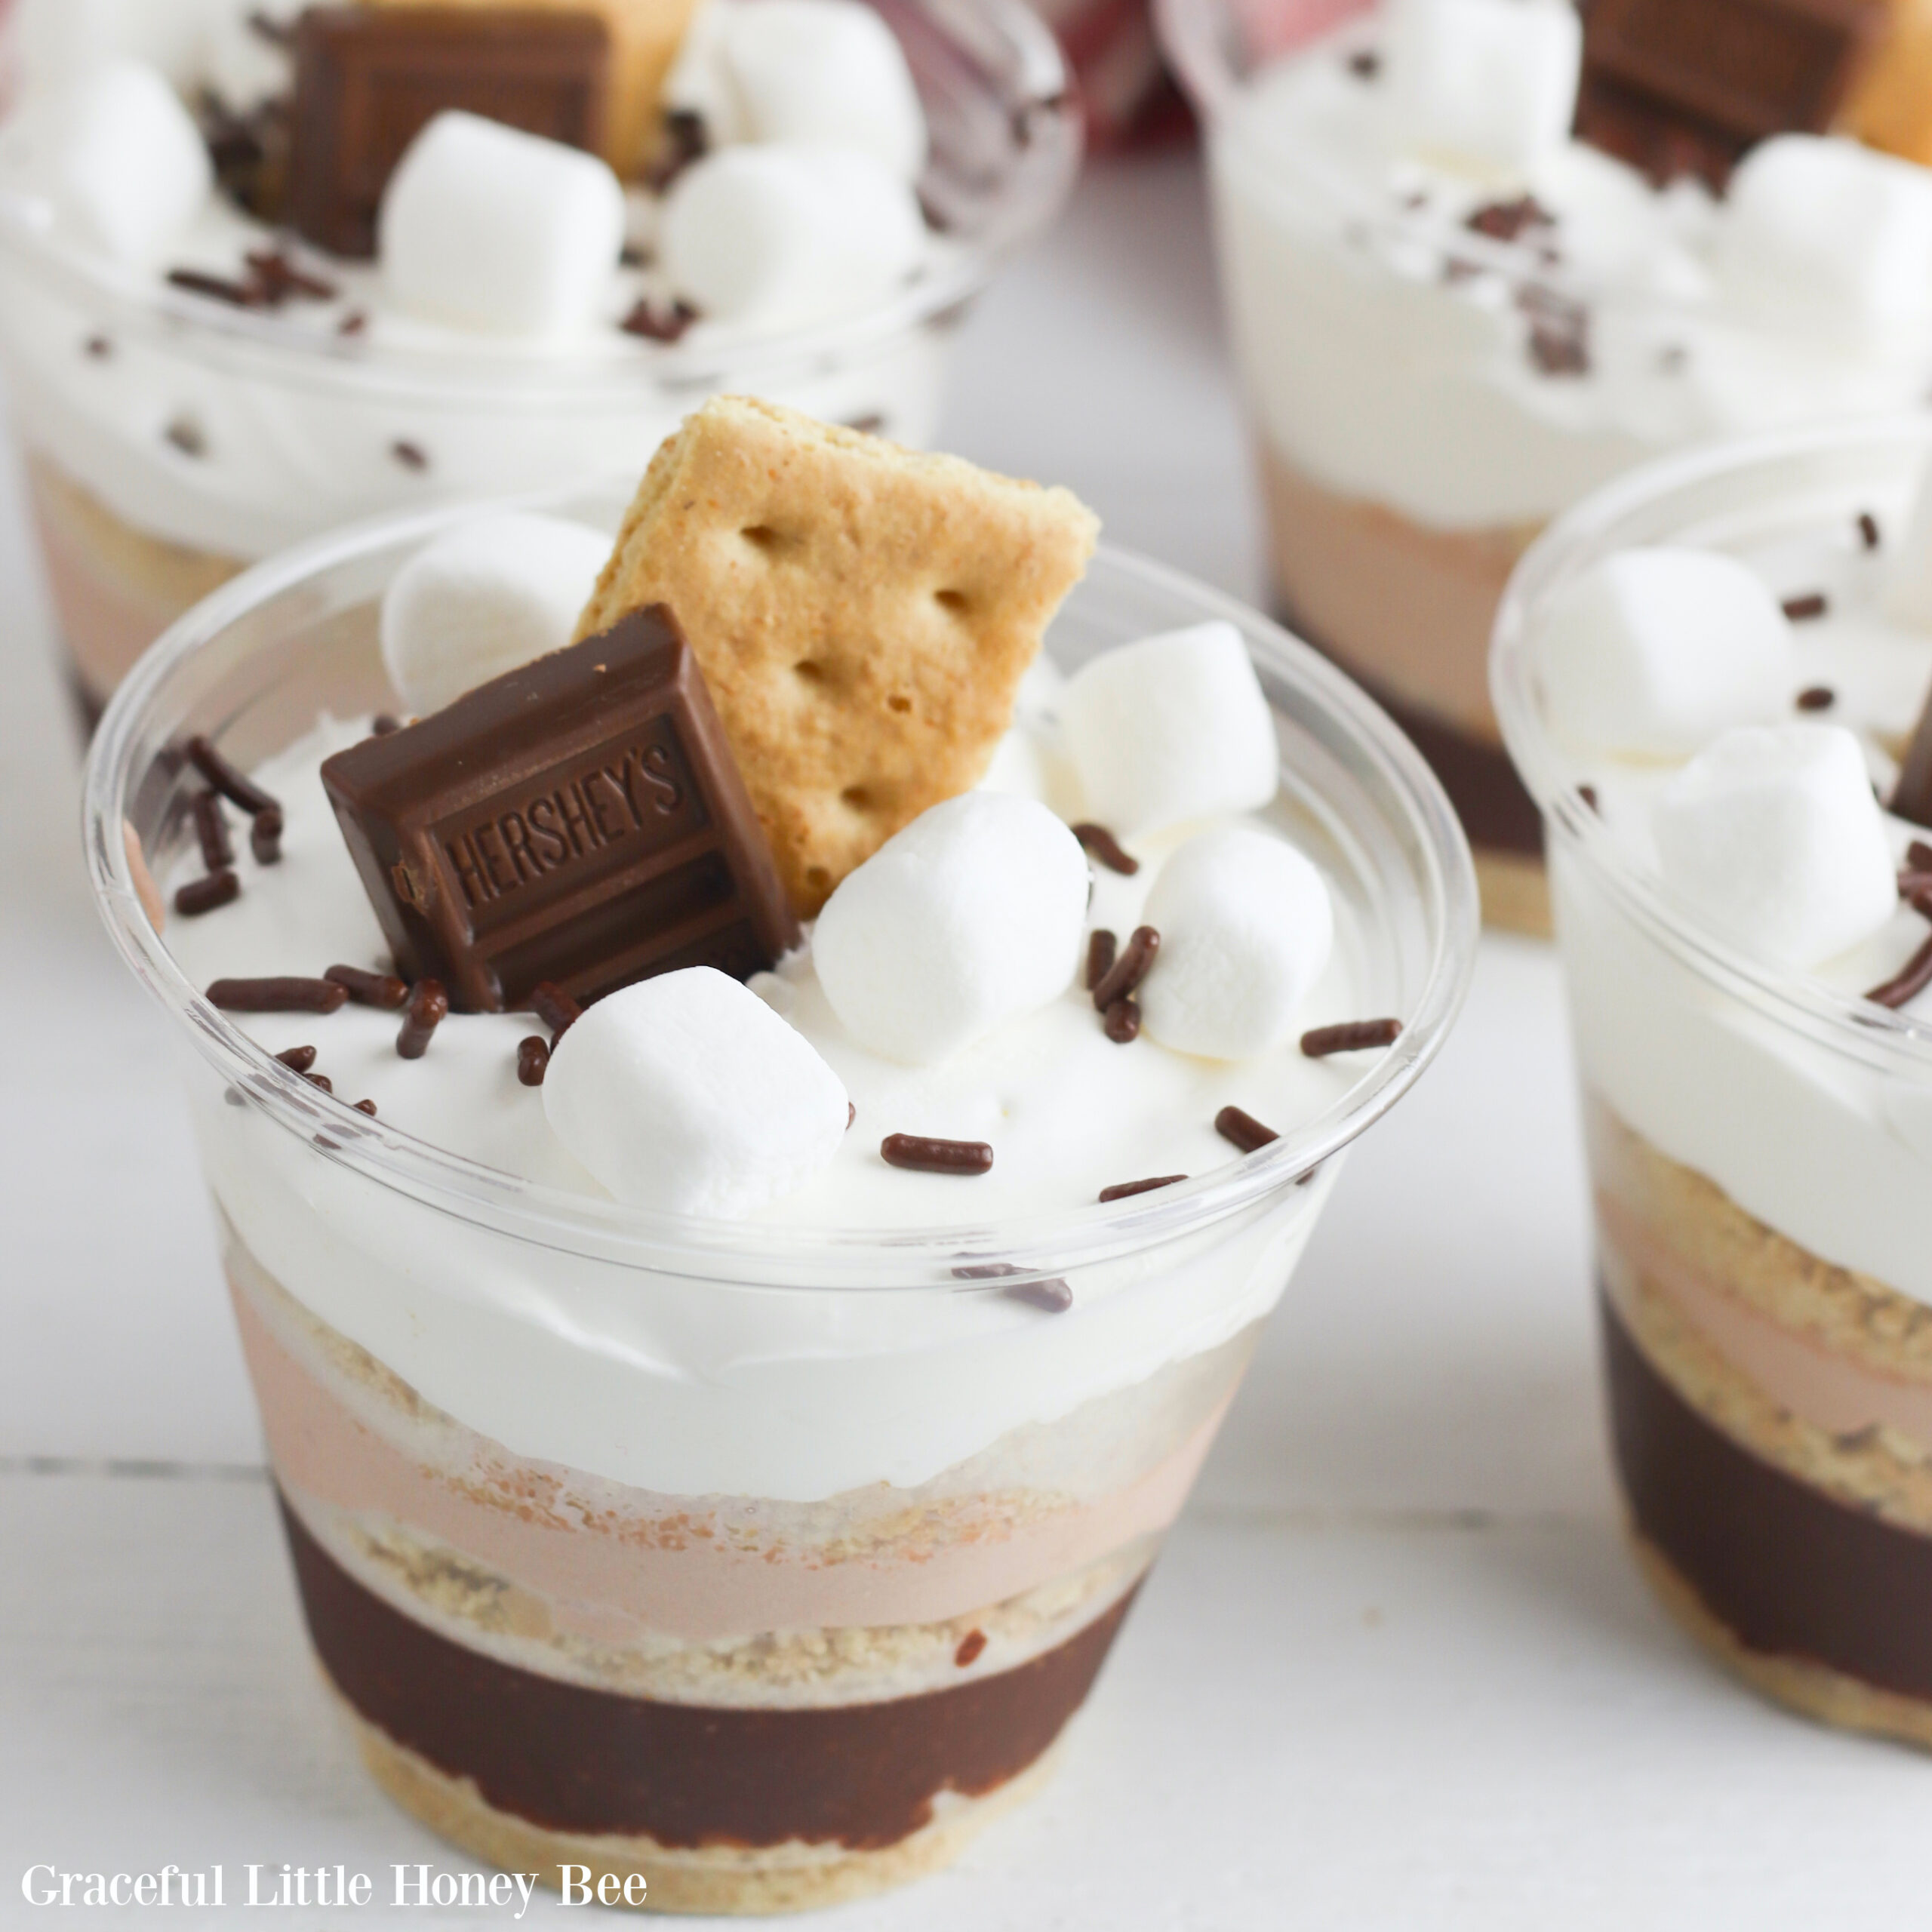 A s'mores pudding parfait topped with mini marshmallows, chocolate sprinkles, graham cracker and Hershy's chocolate.